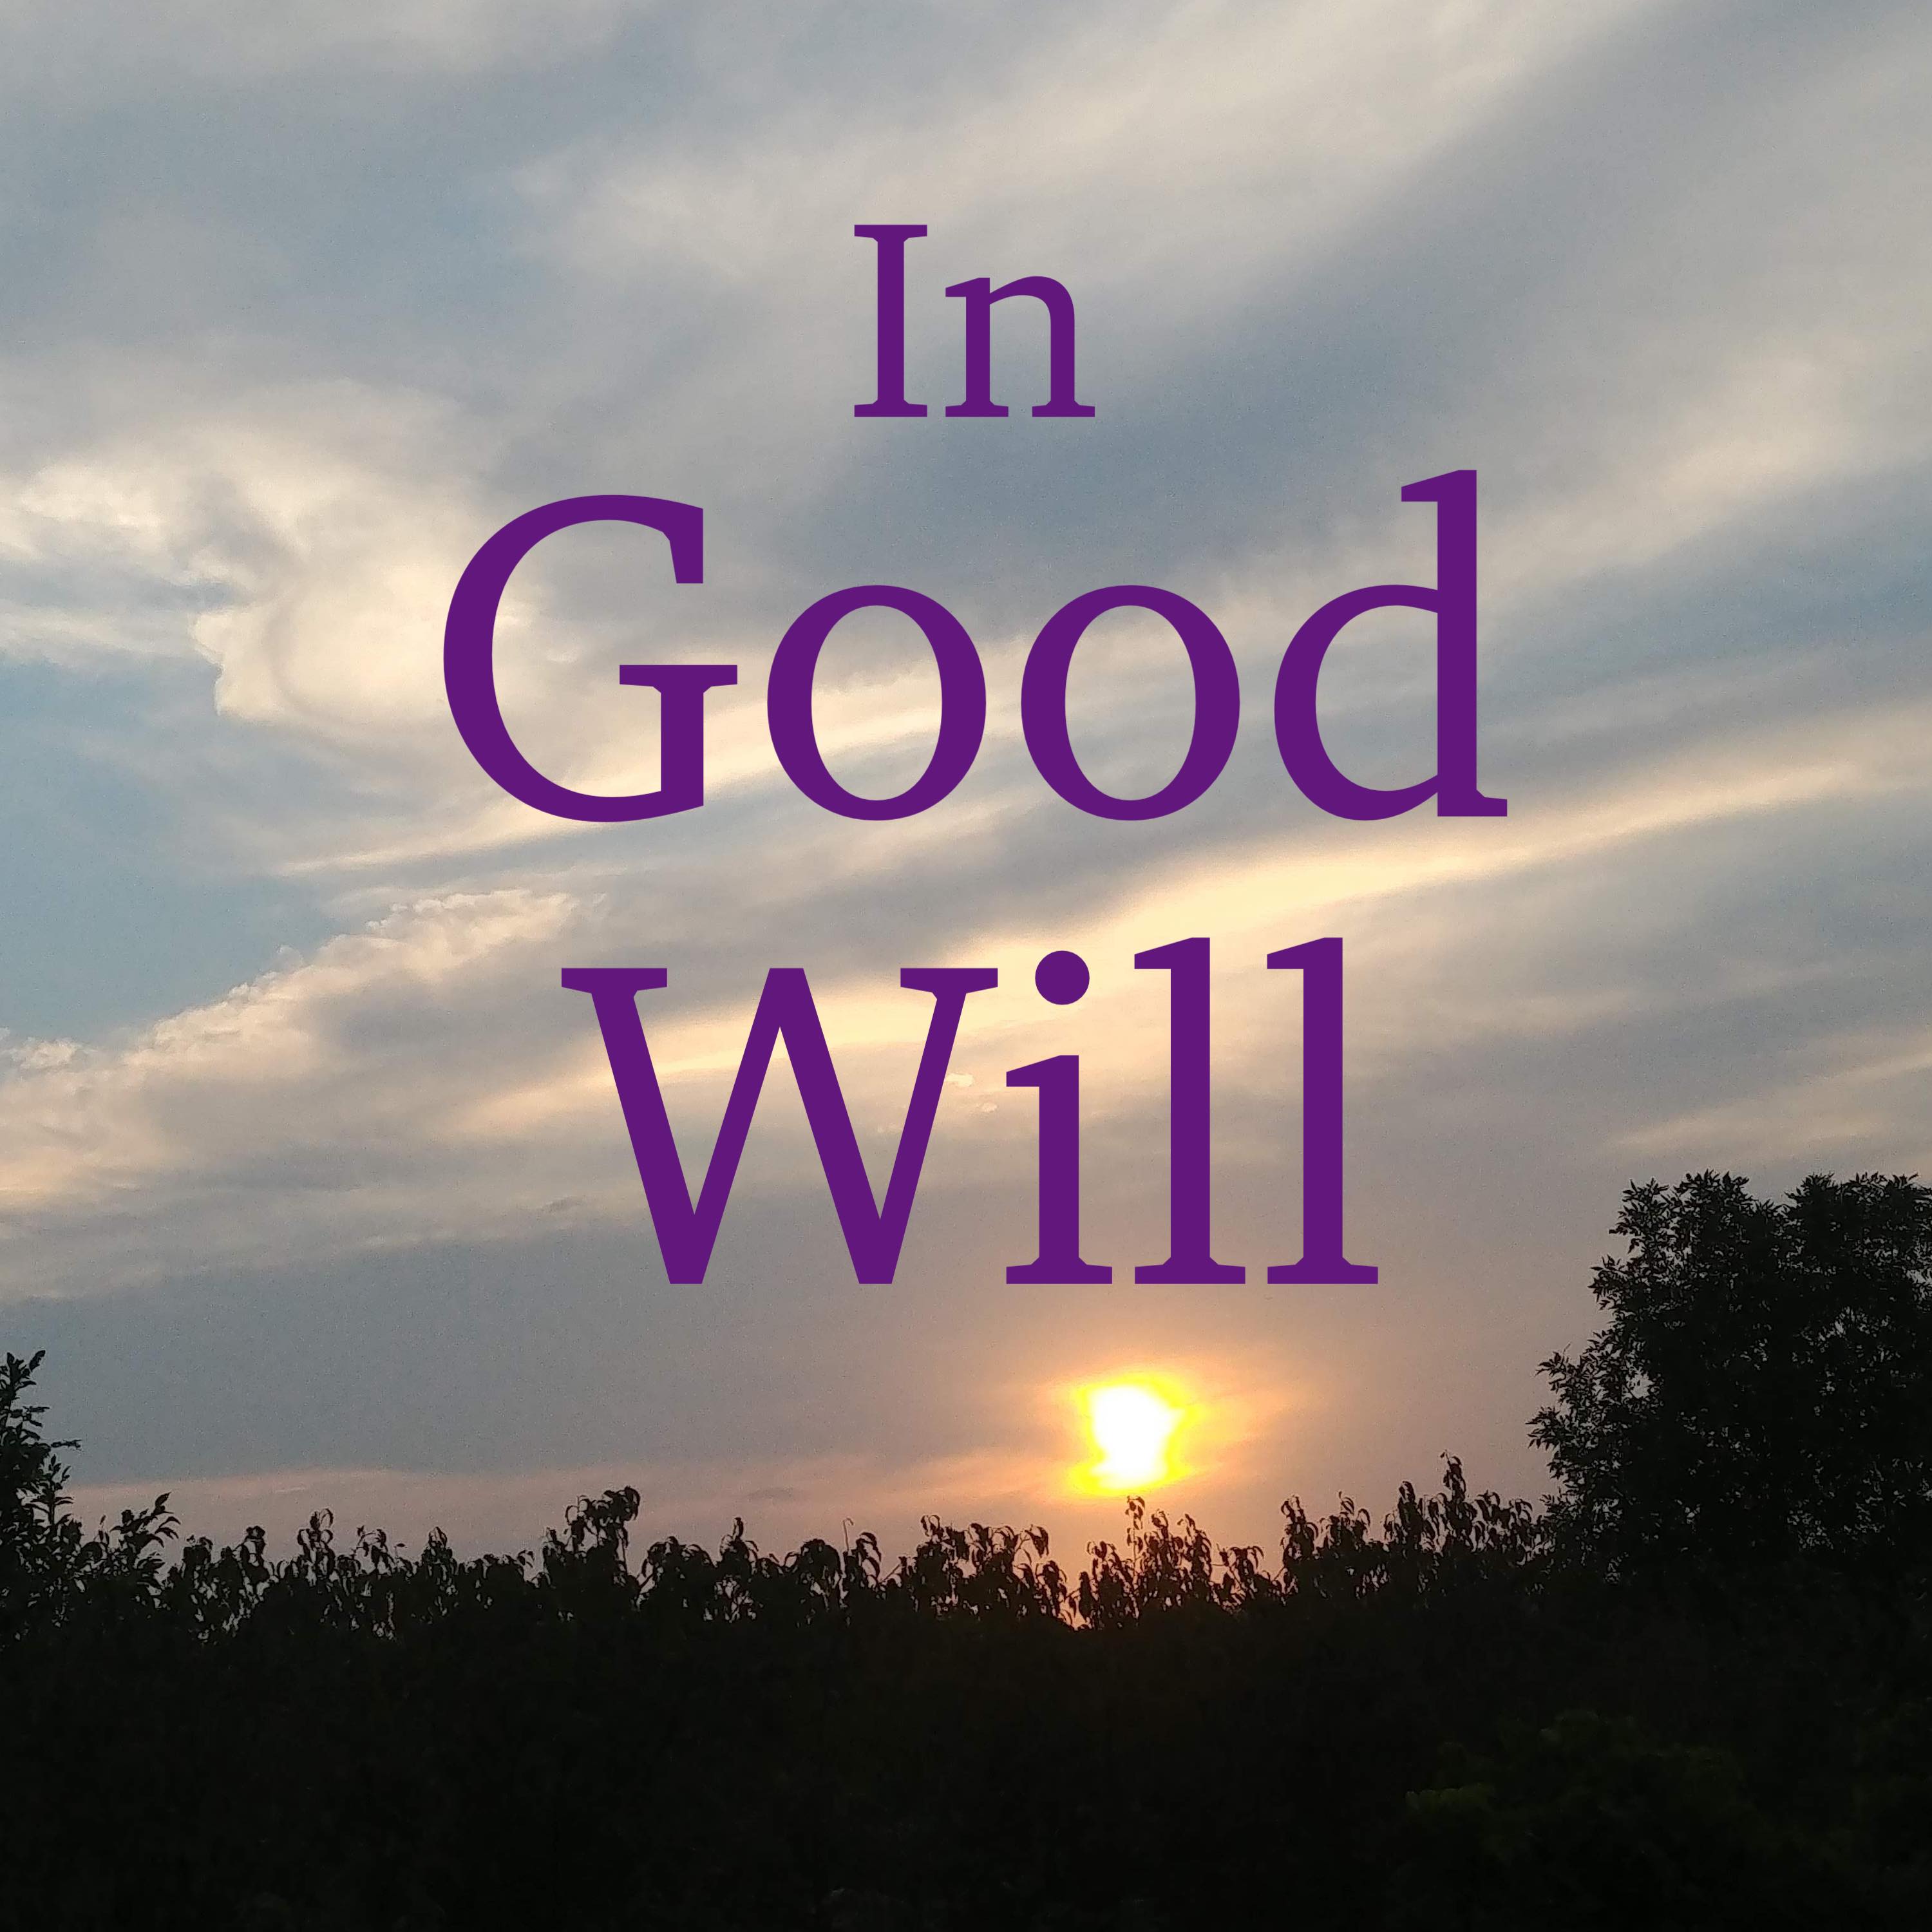 In Good Will